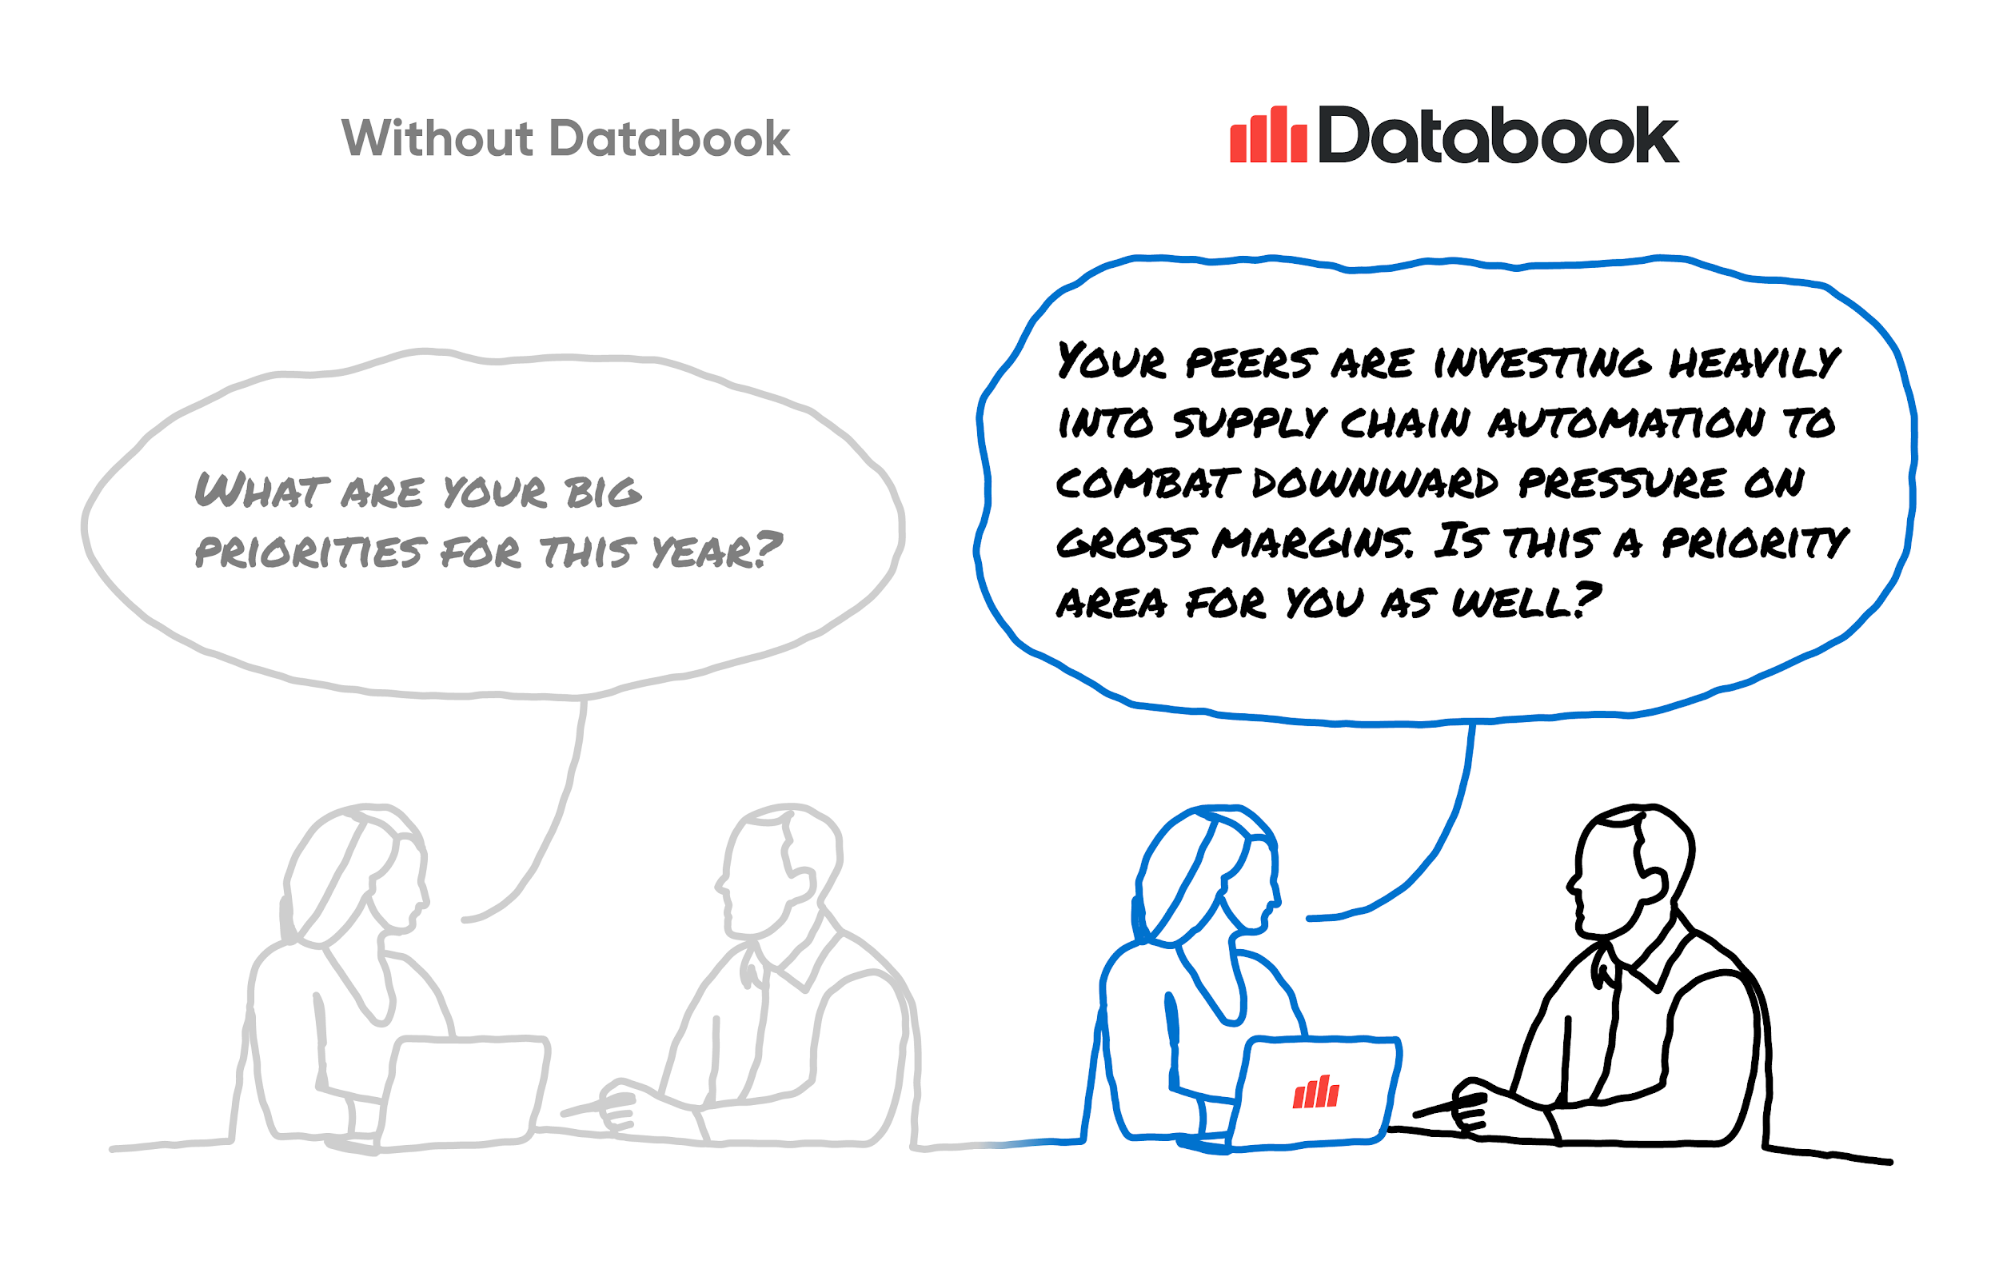 Databook Adds Insight Coverage for Private Companies